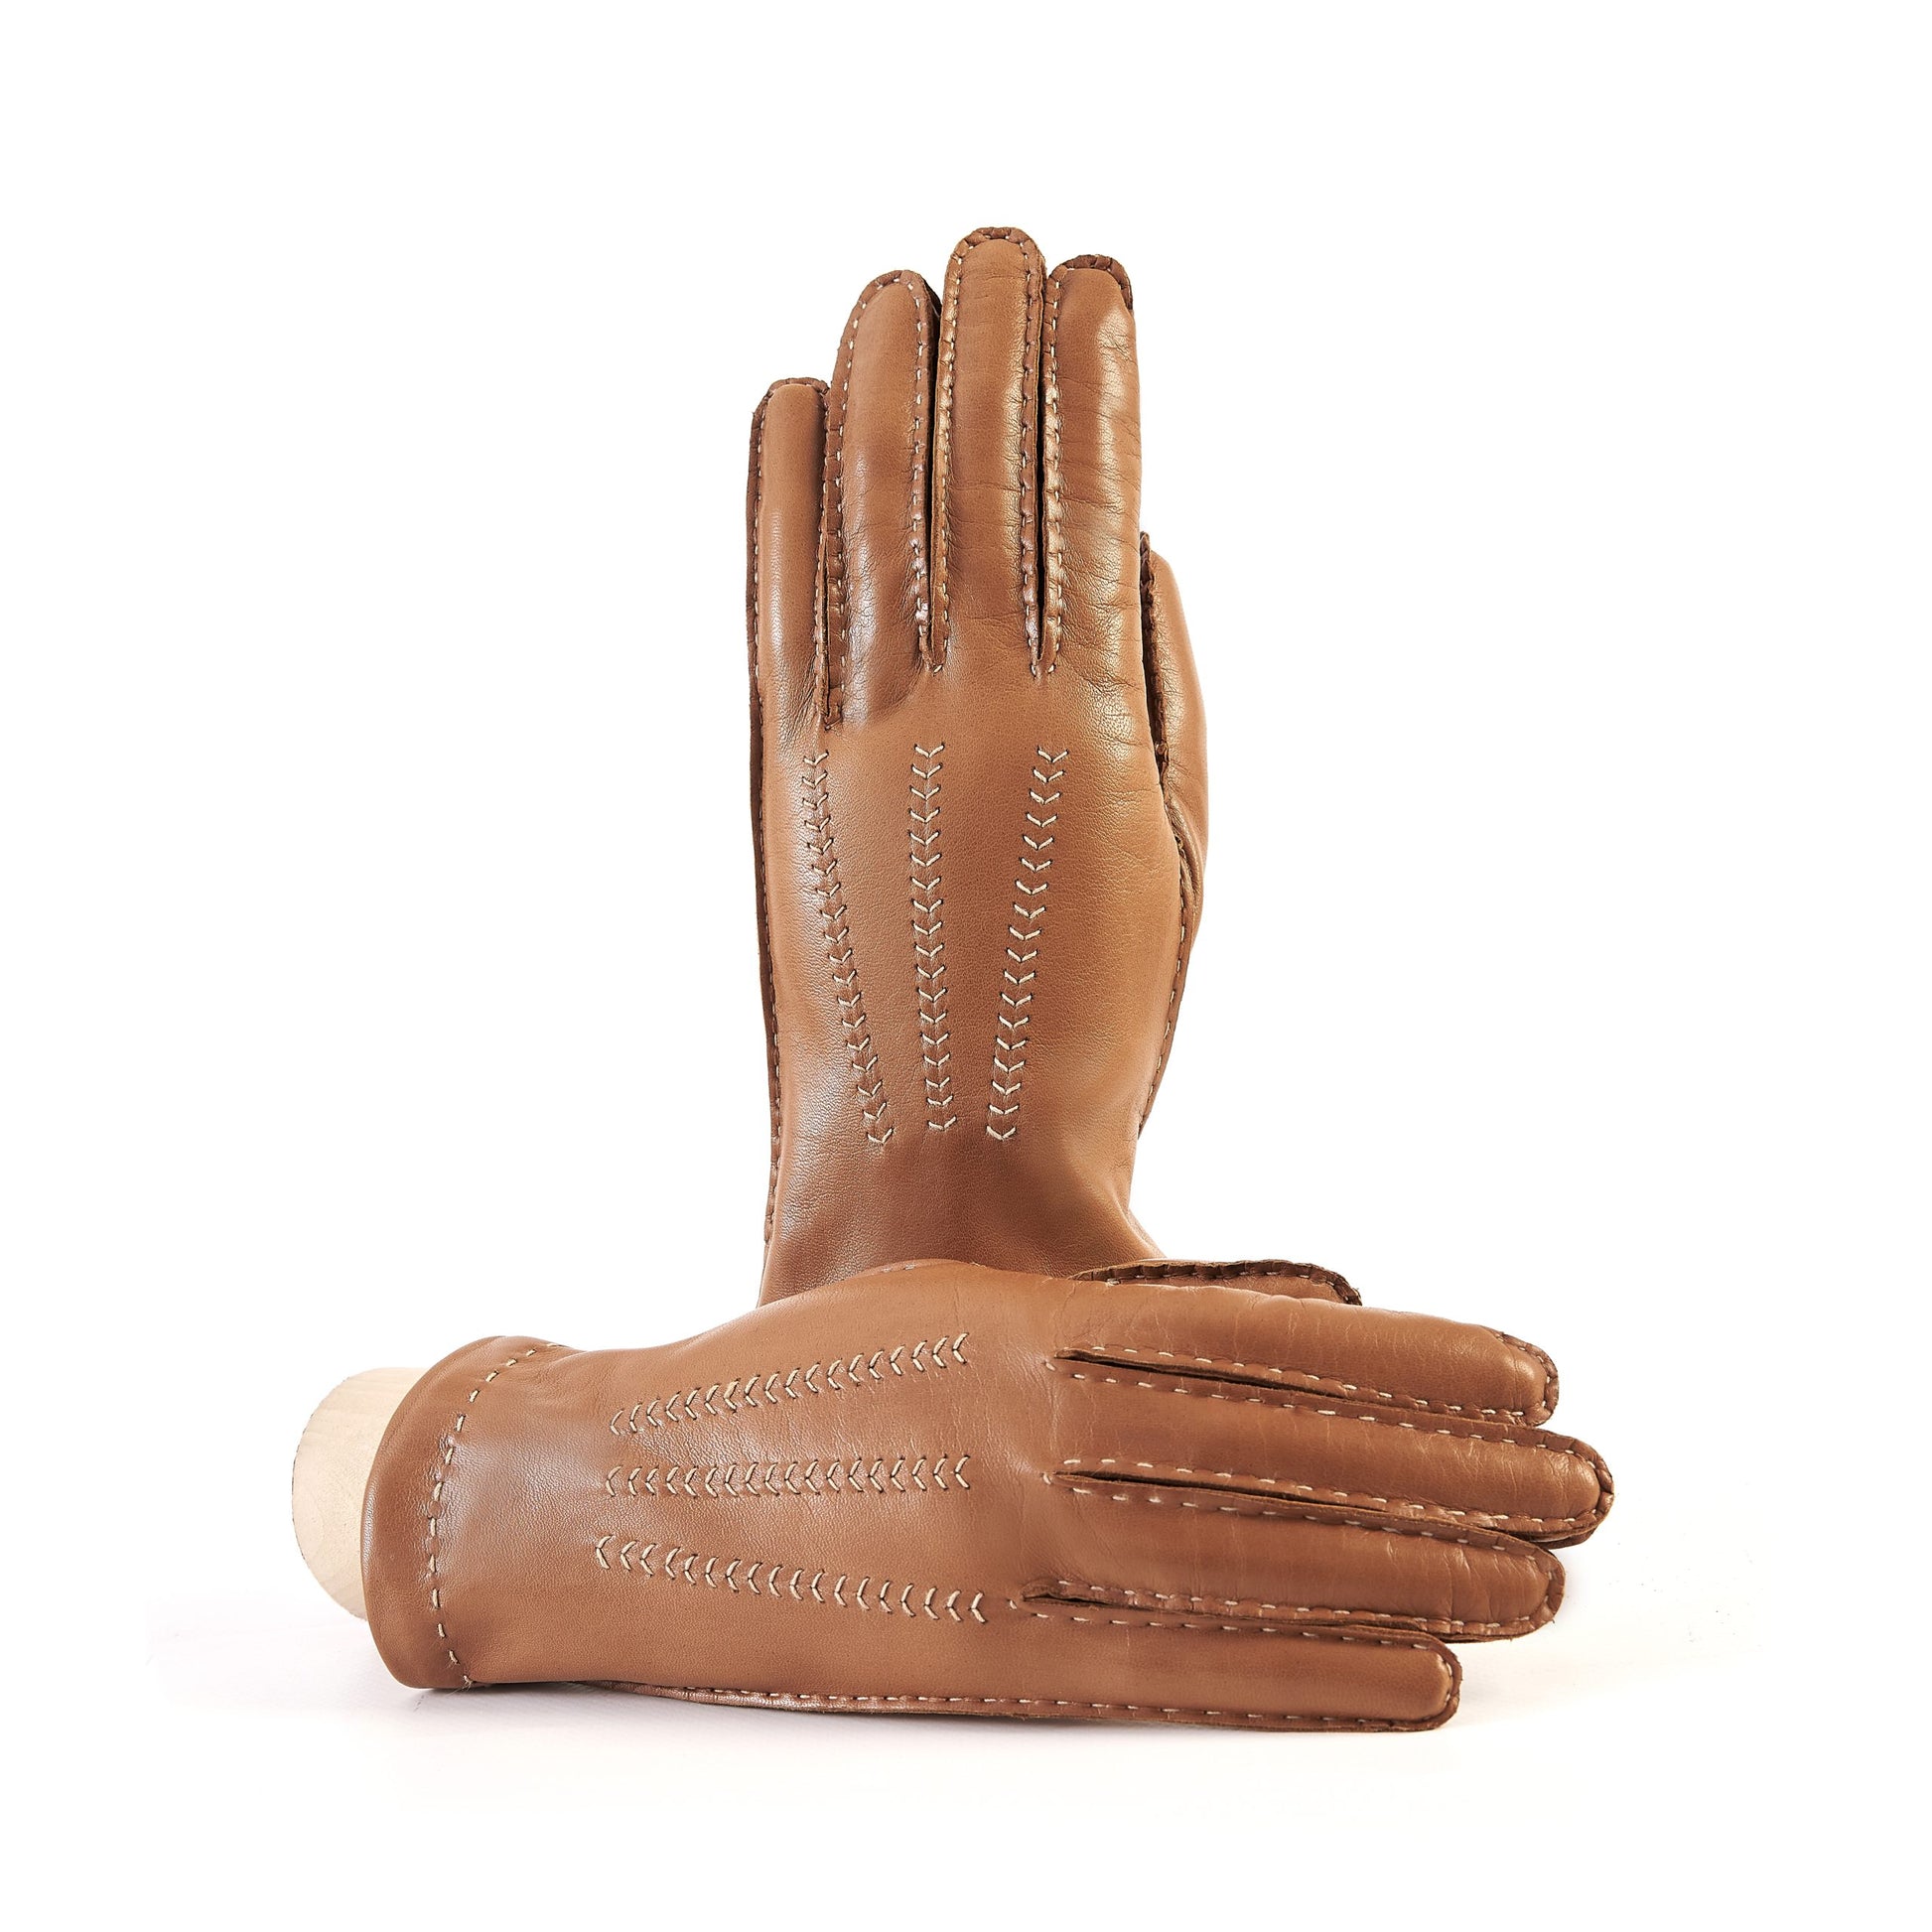 Women's classic camel nappa leather gloves entirely hand-sewn with cashmere lining